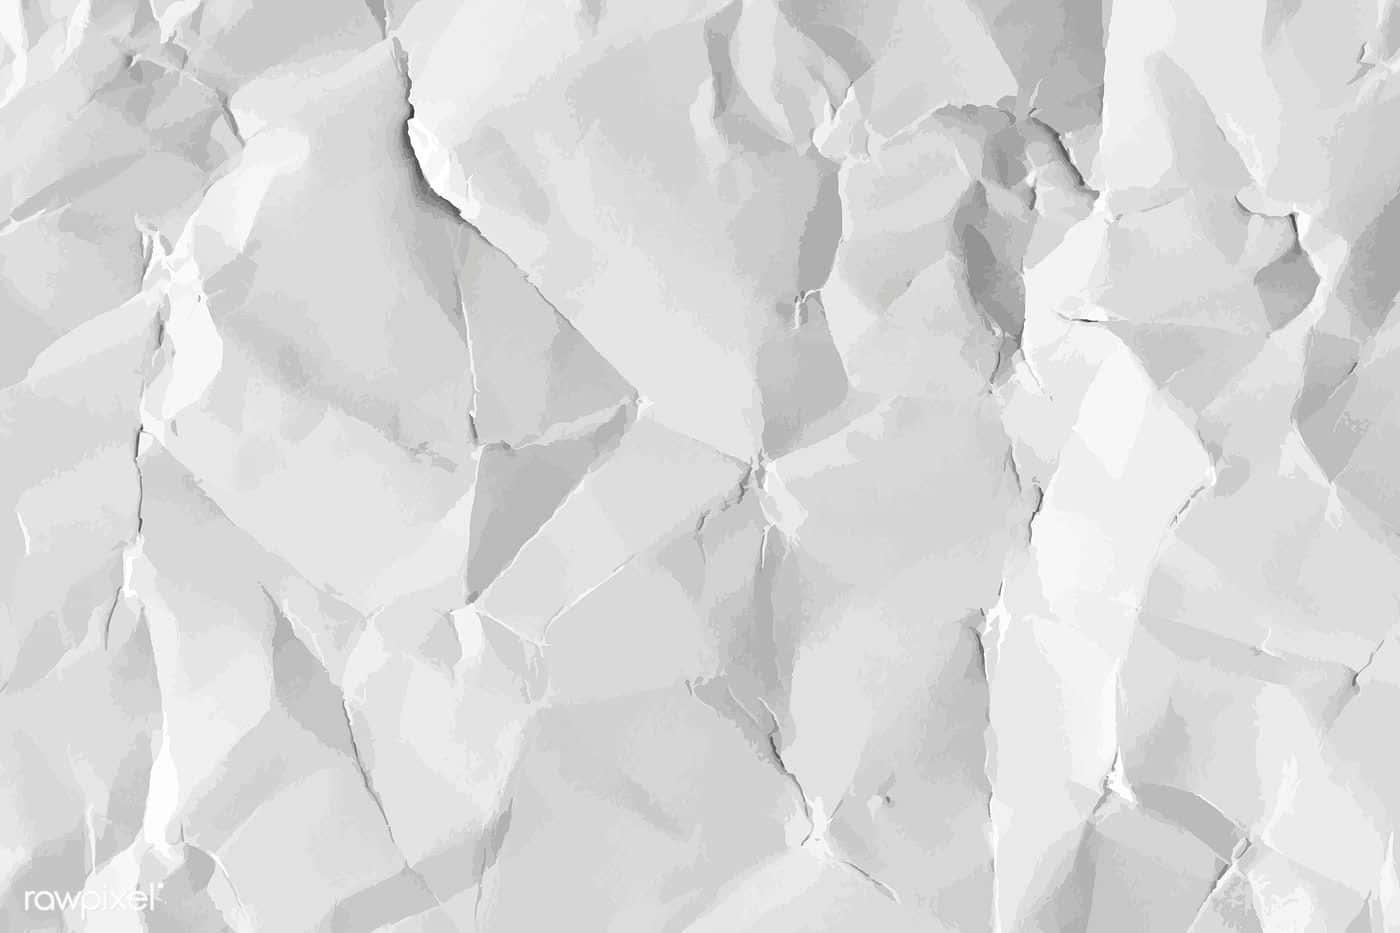 A White Paper Texture With Crumpled Edges